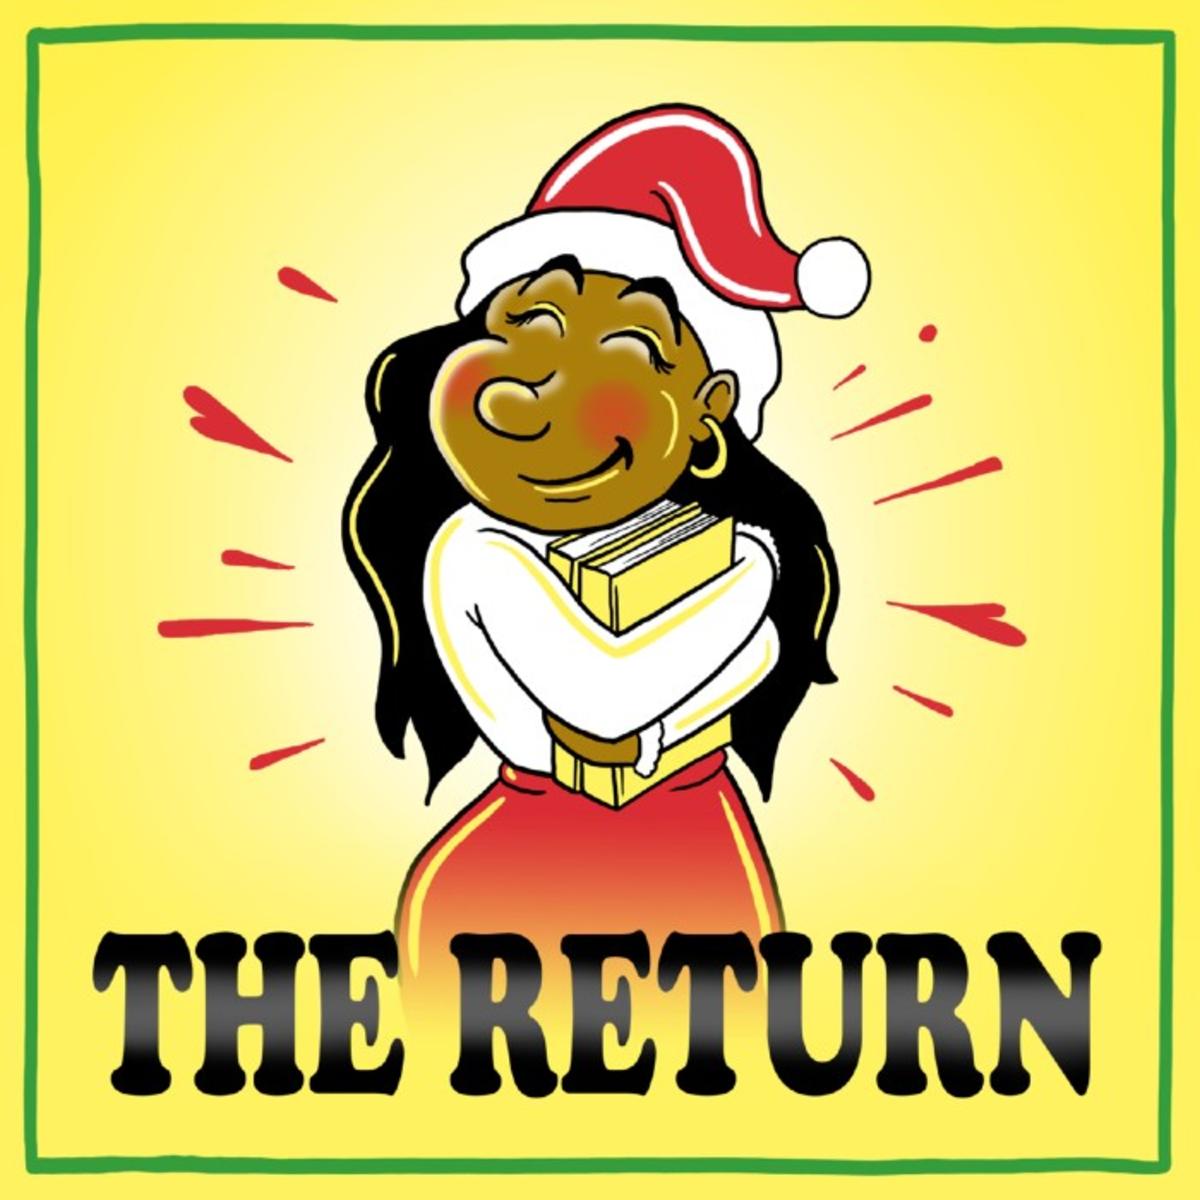 Chance The Rapper Spits Christmas Bars On “The Return”